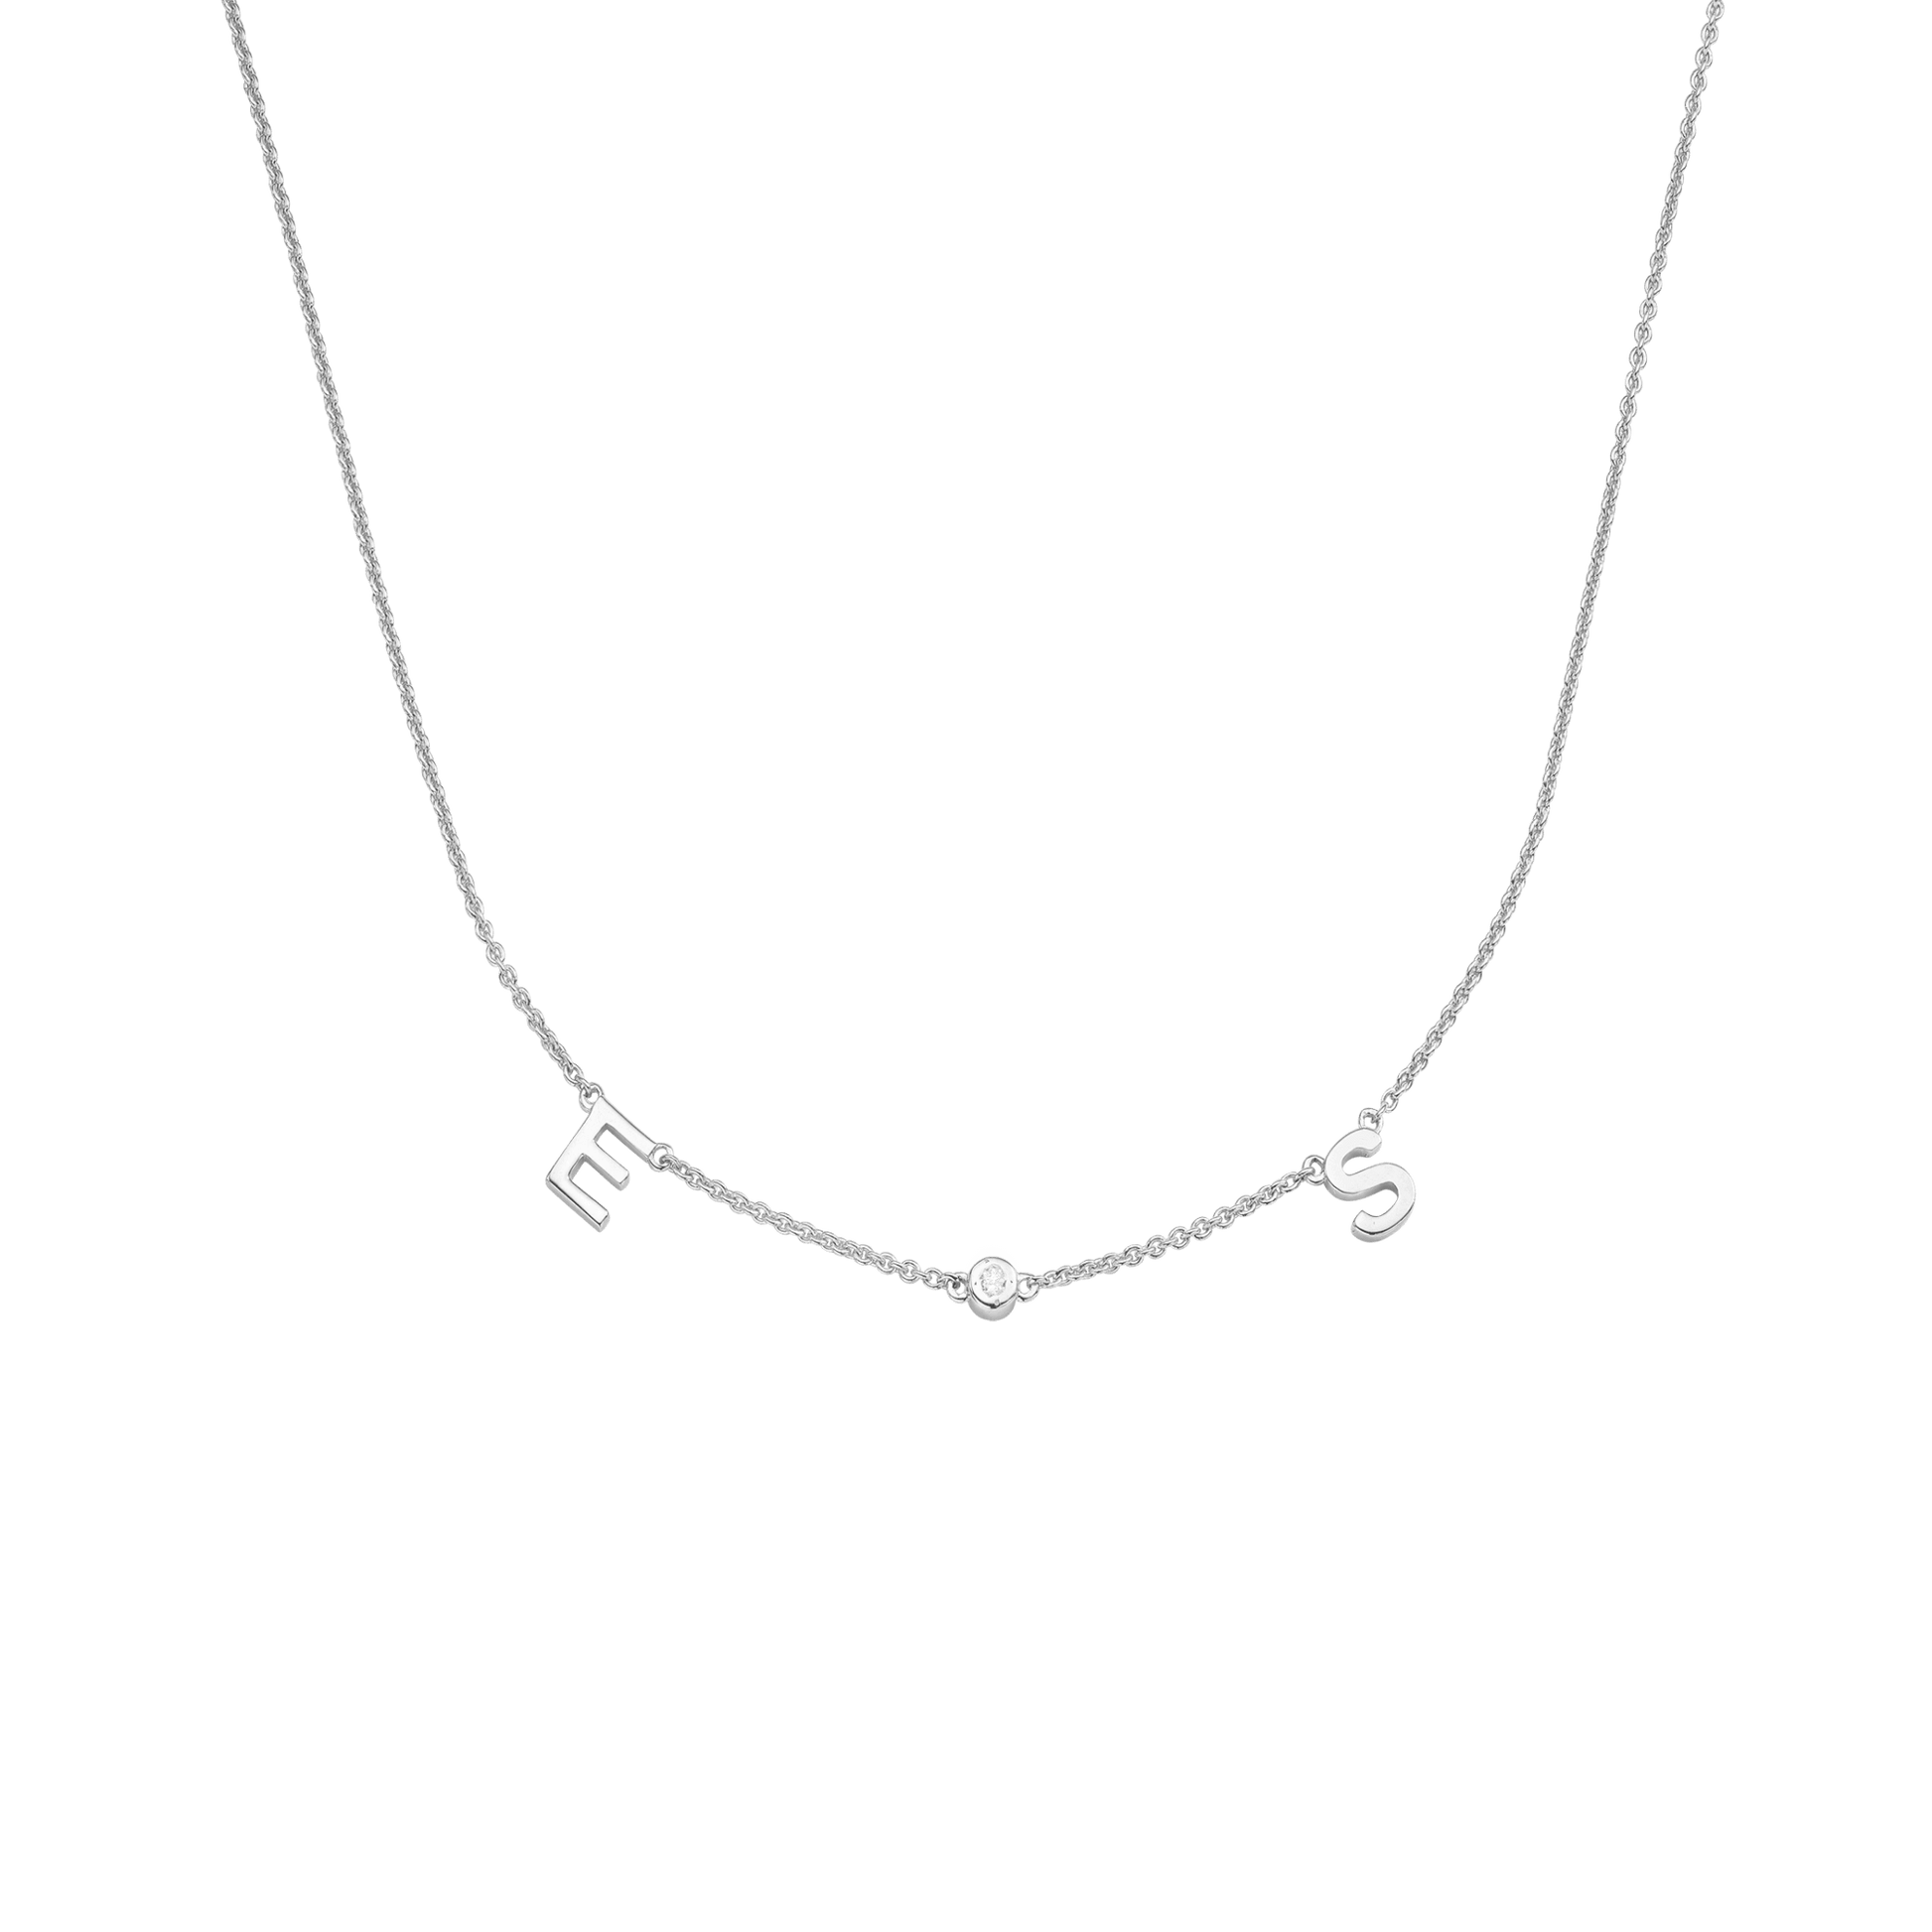 Initial Necklace with Diamonds - 925 Sterling Silver Necklaces magal-dev 1 Initial + 1 Diamond Adjustable 16-17" (40cm-43cm) 